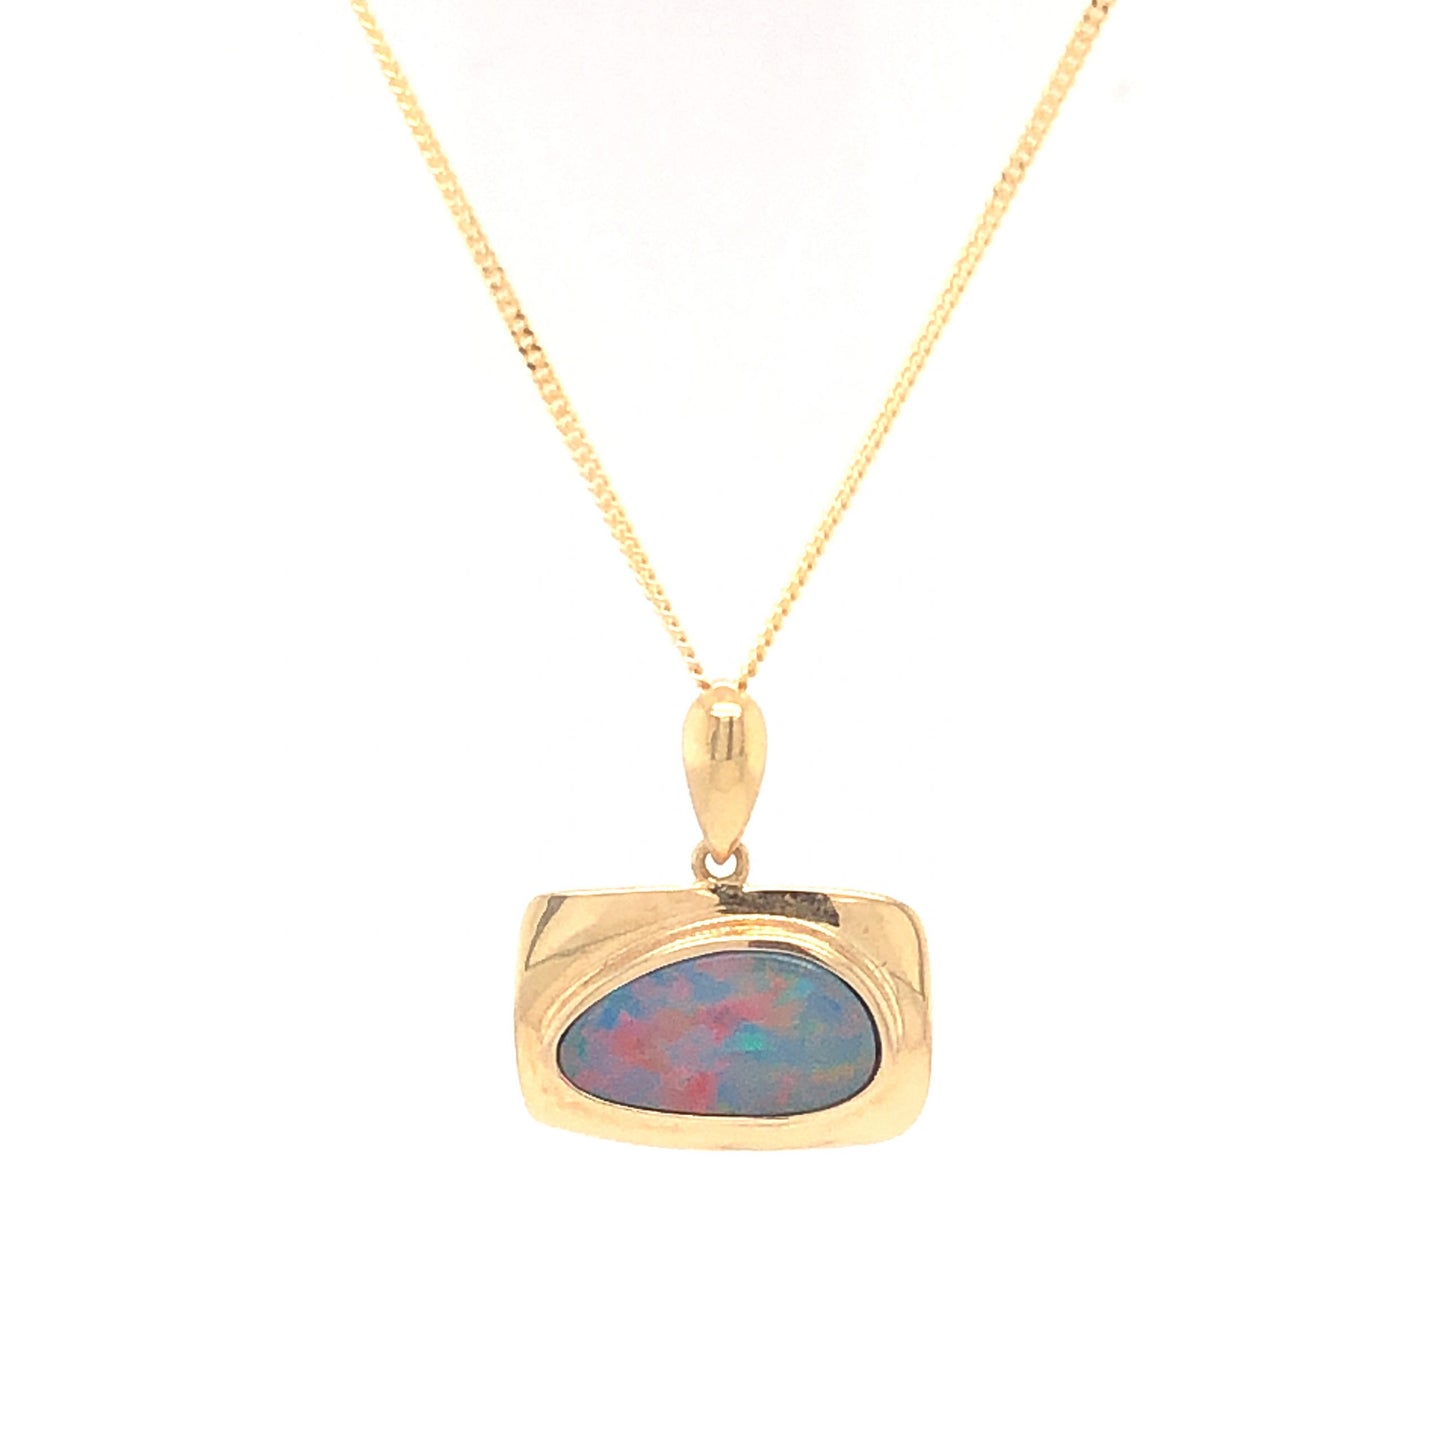 Black Boulder Opal Pendant Necklace in 18k Yellow Gold